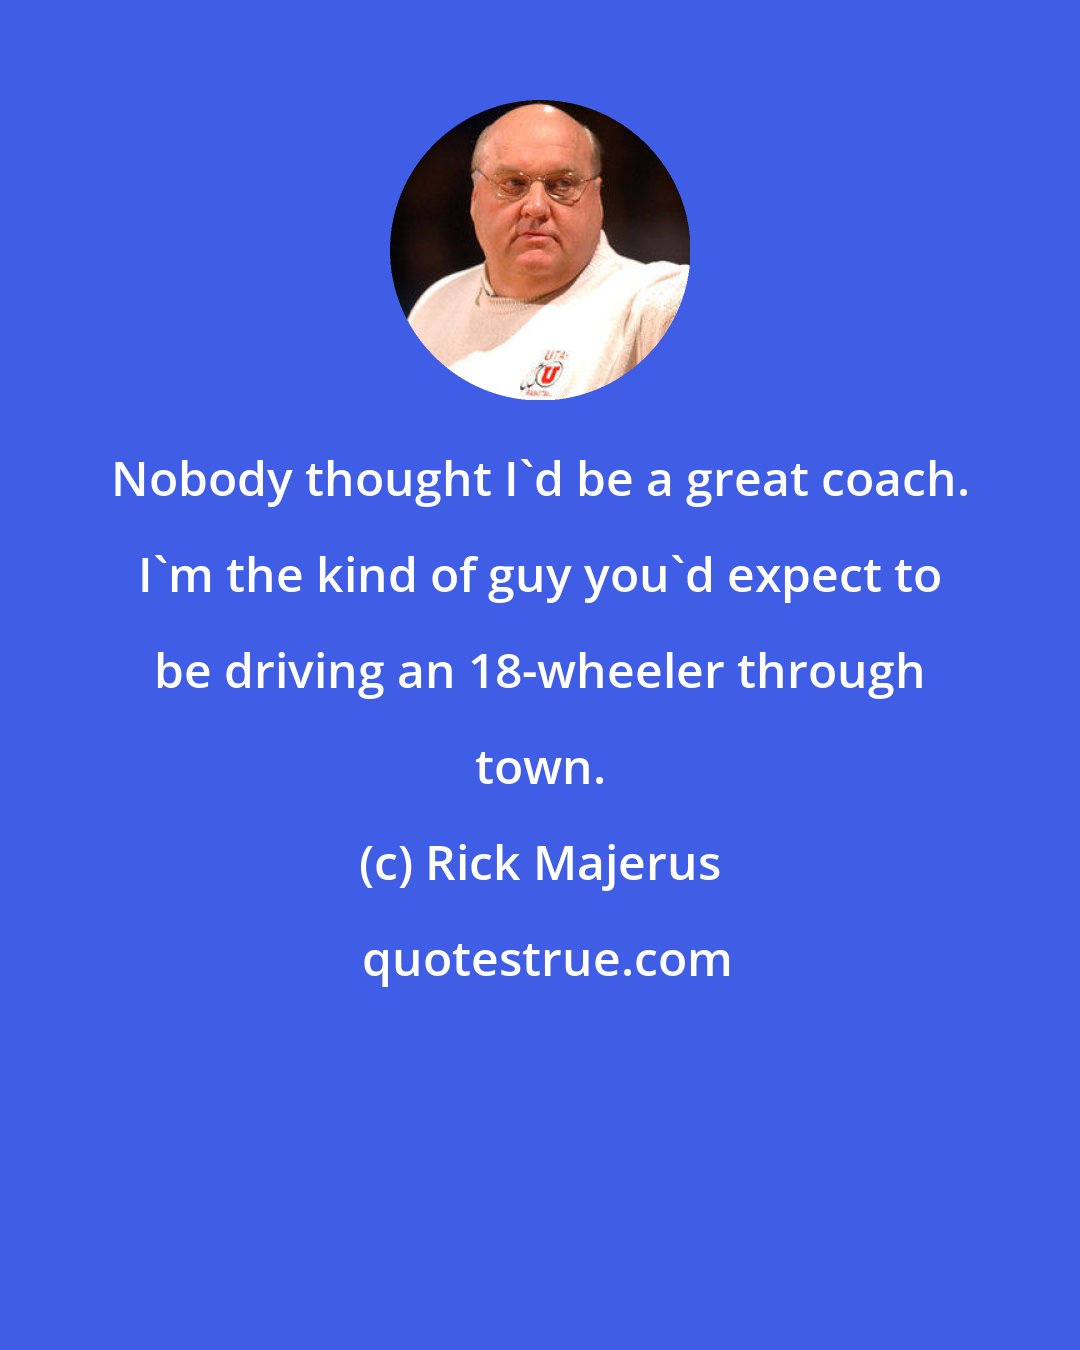 Rick Majerus: Nobody thought I'd be a great coach. I'm the kind of guy you'd expect to be driving an 18-wheeler through town.